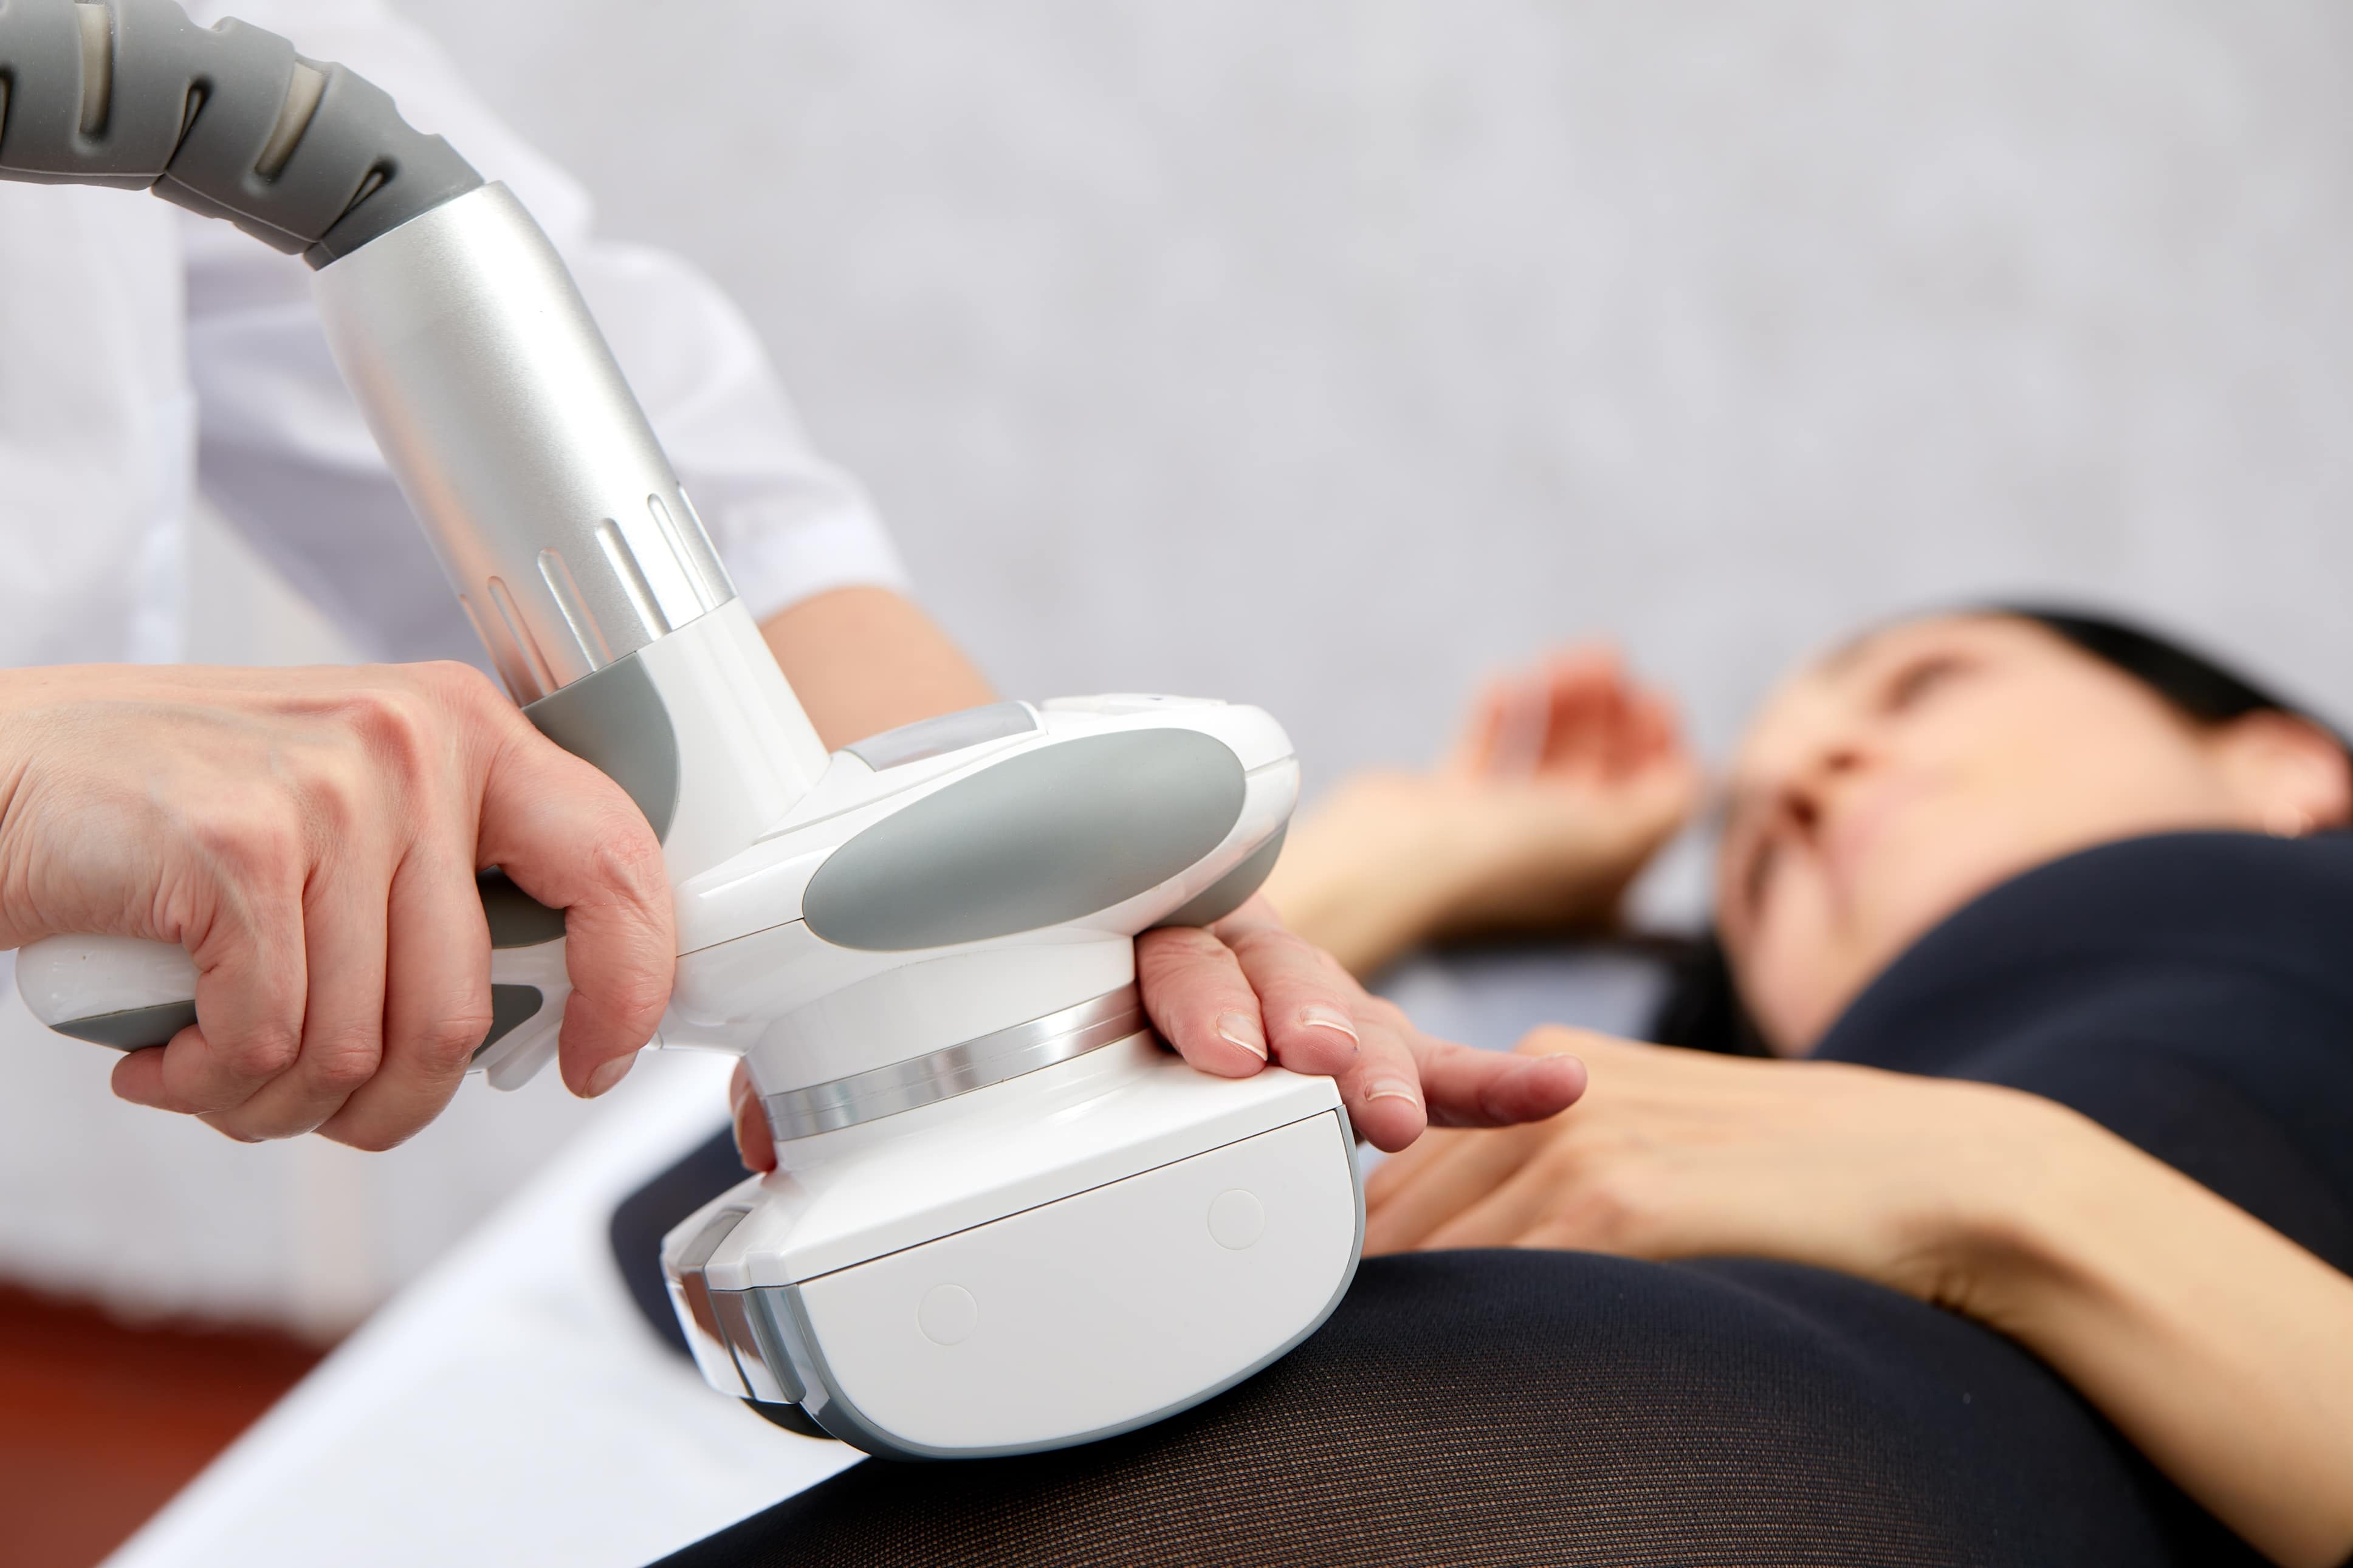 Woman lying on procedural table for laser lipolysis weight loss session